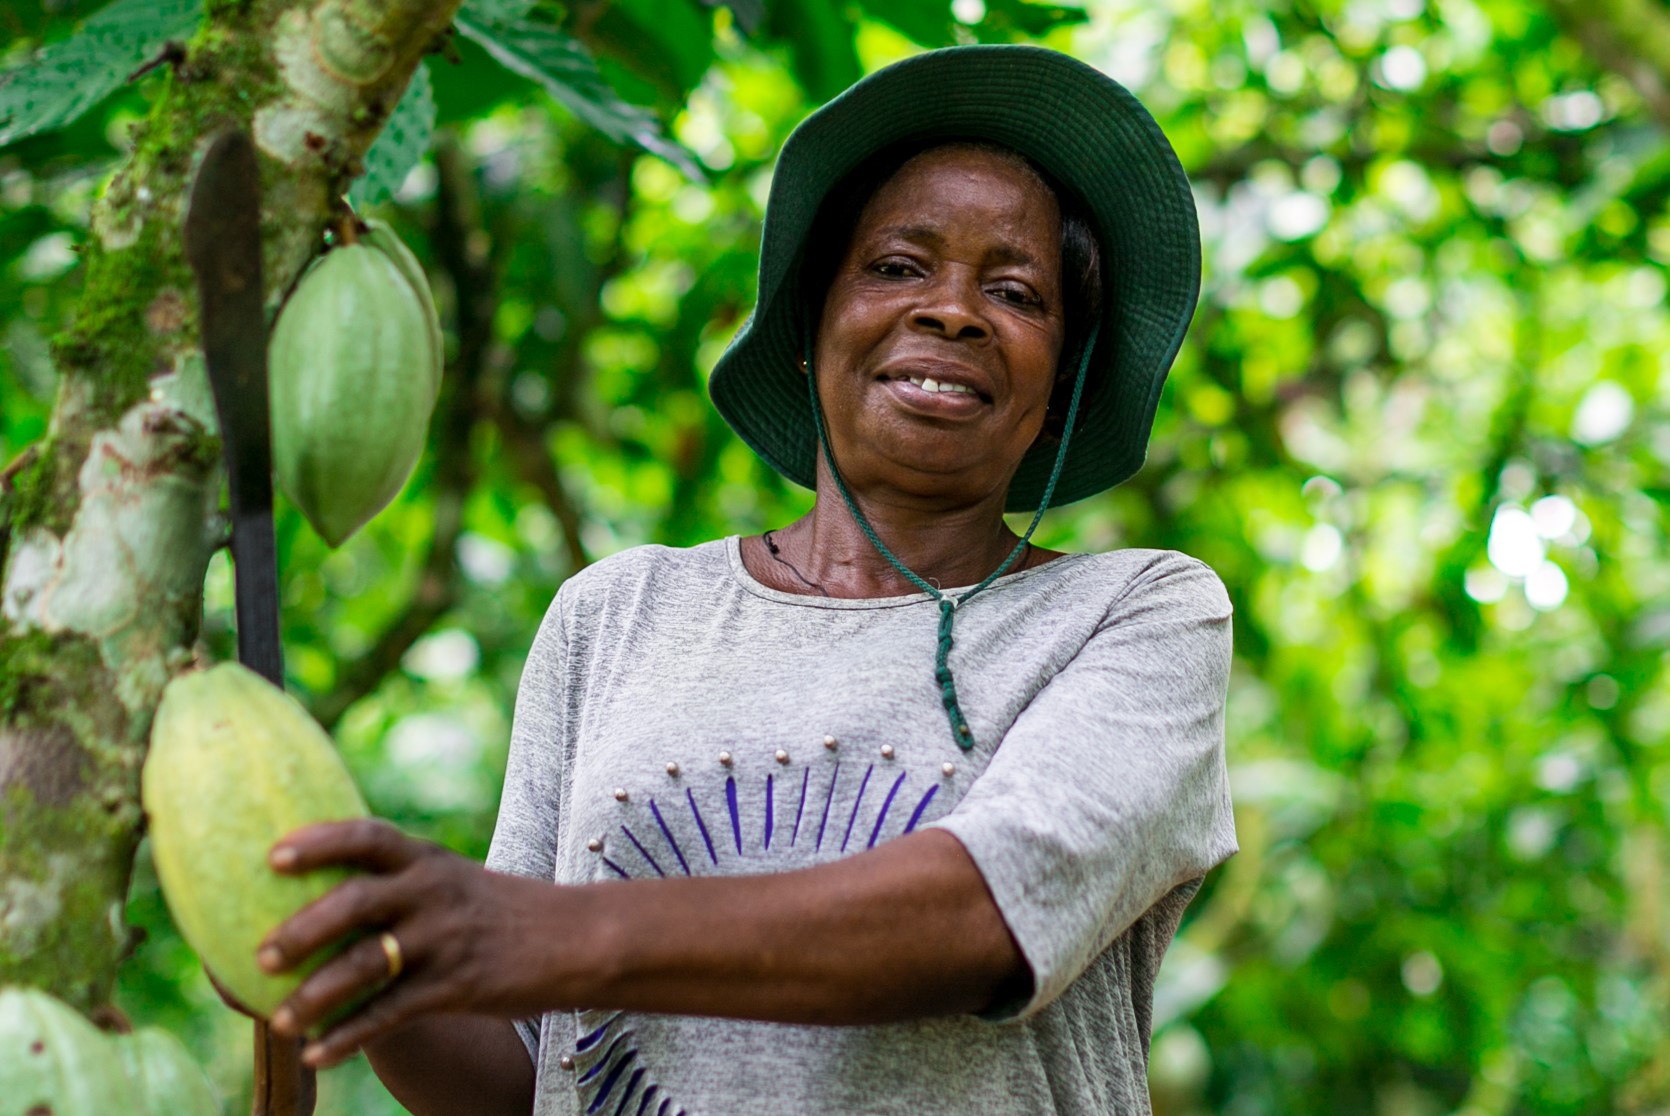 New Fairtrade report highlights how cocoa sector can best work through co-operatives to enable farmers to progress towards living incomes